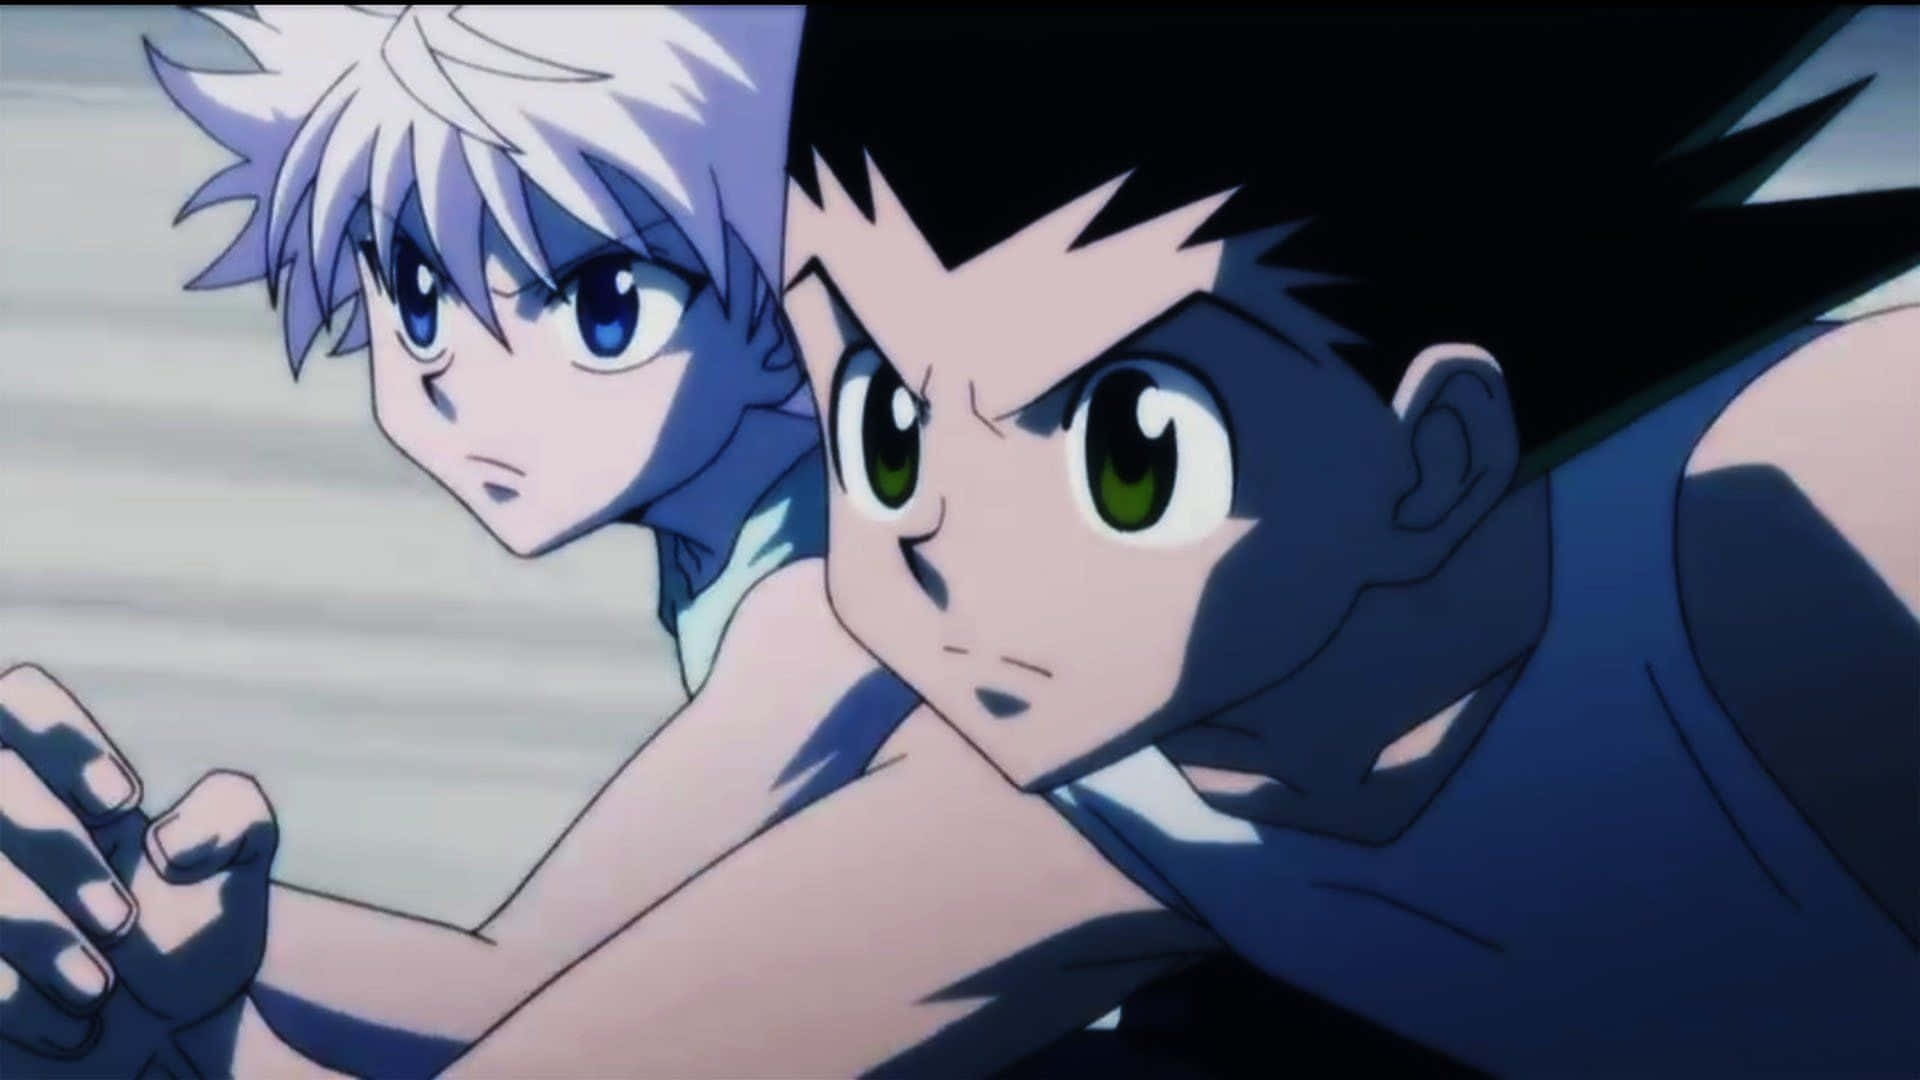 Tag Team Duel - Killua and Gon Fight Together Wallpaper